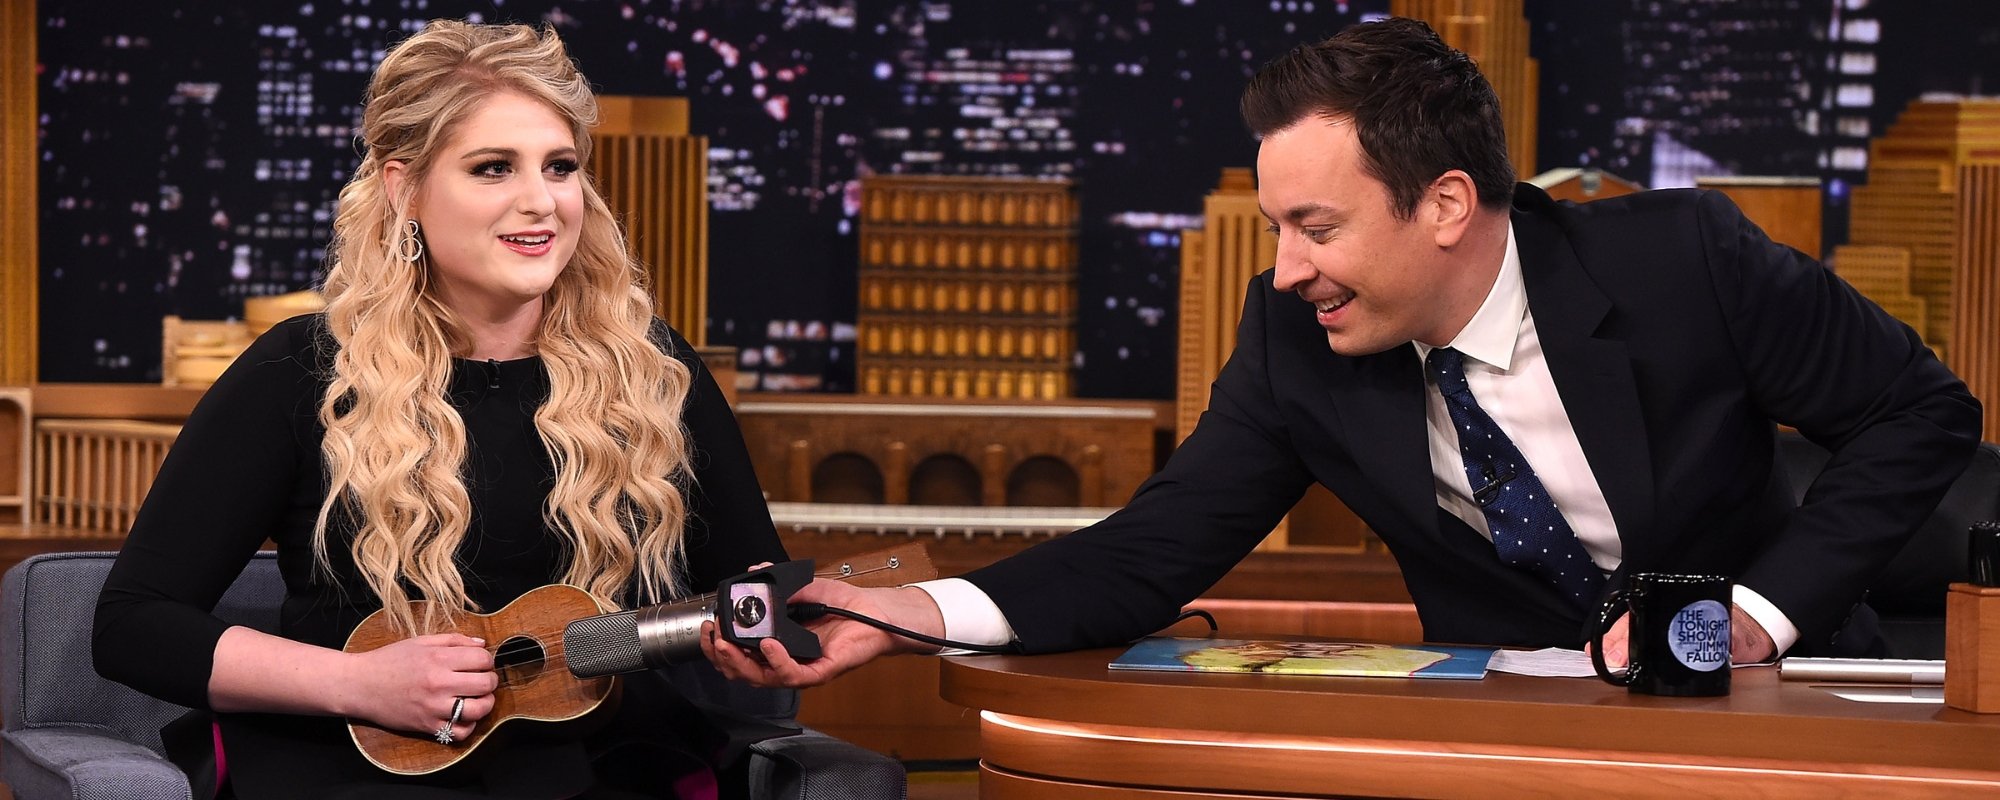 Watch: Jimmy Fallon and Meghan Trainor Bring Christmas Joy With ‘Wrap Me Up’ Performance on ‘Kimmel’